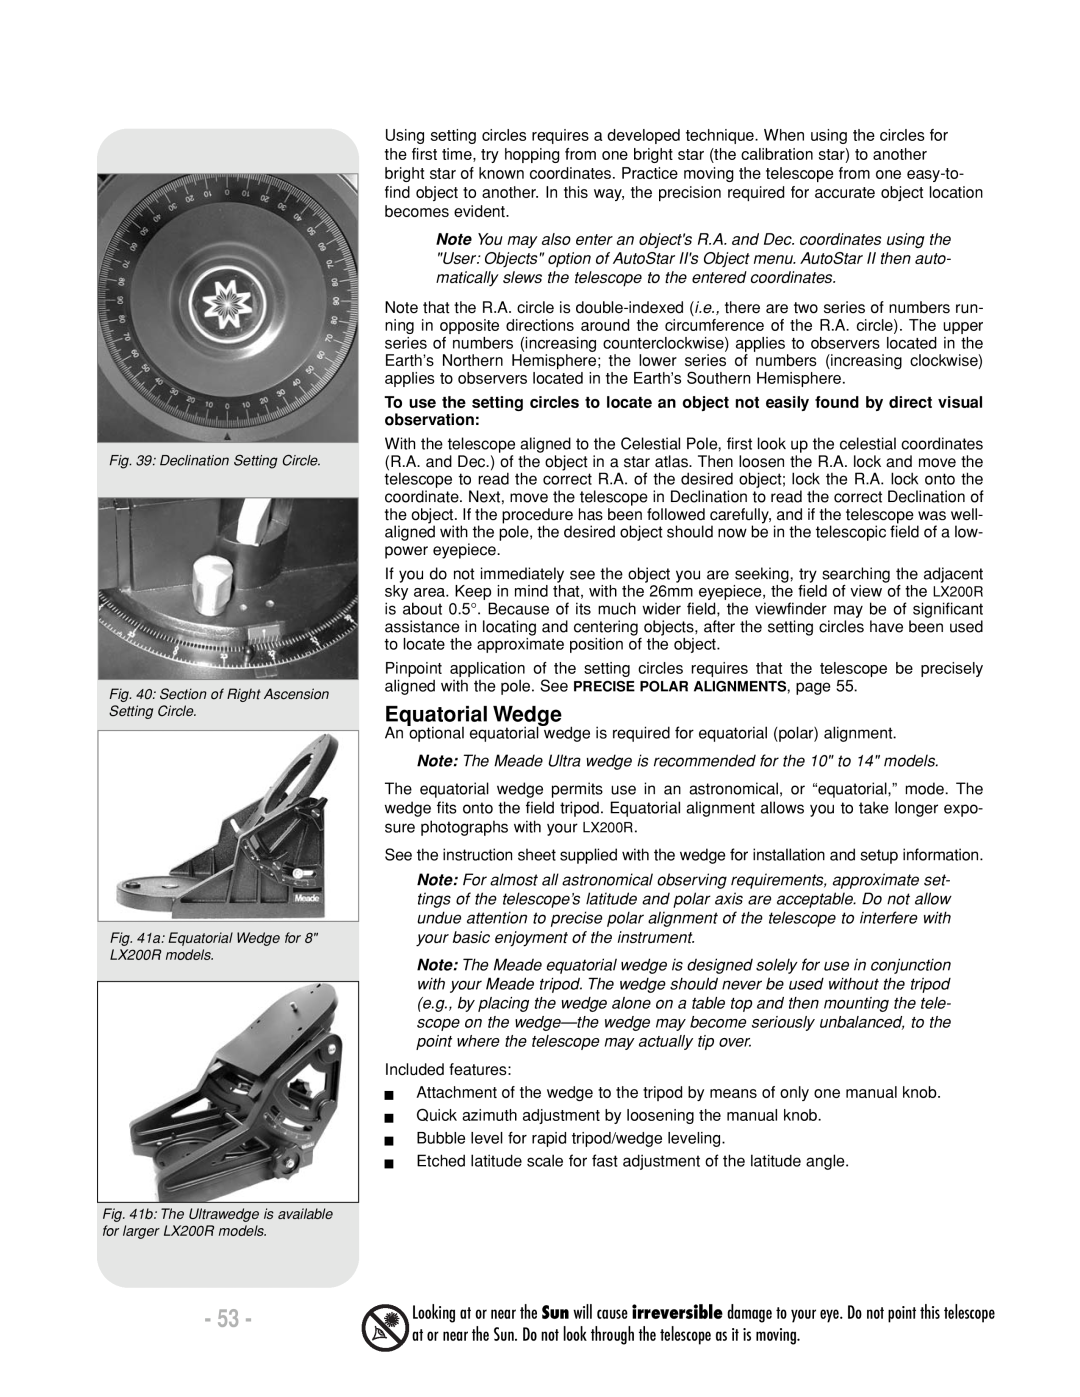 Meade LX200 R instruction manual Equatorial Wedge 